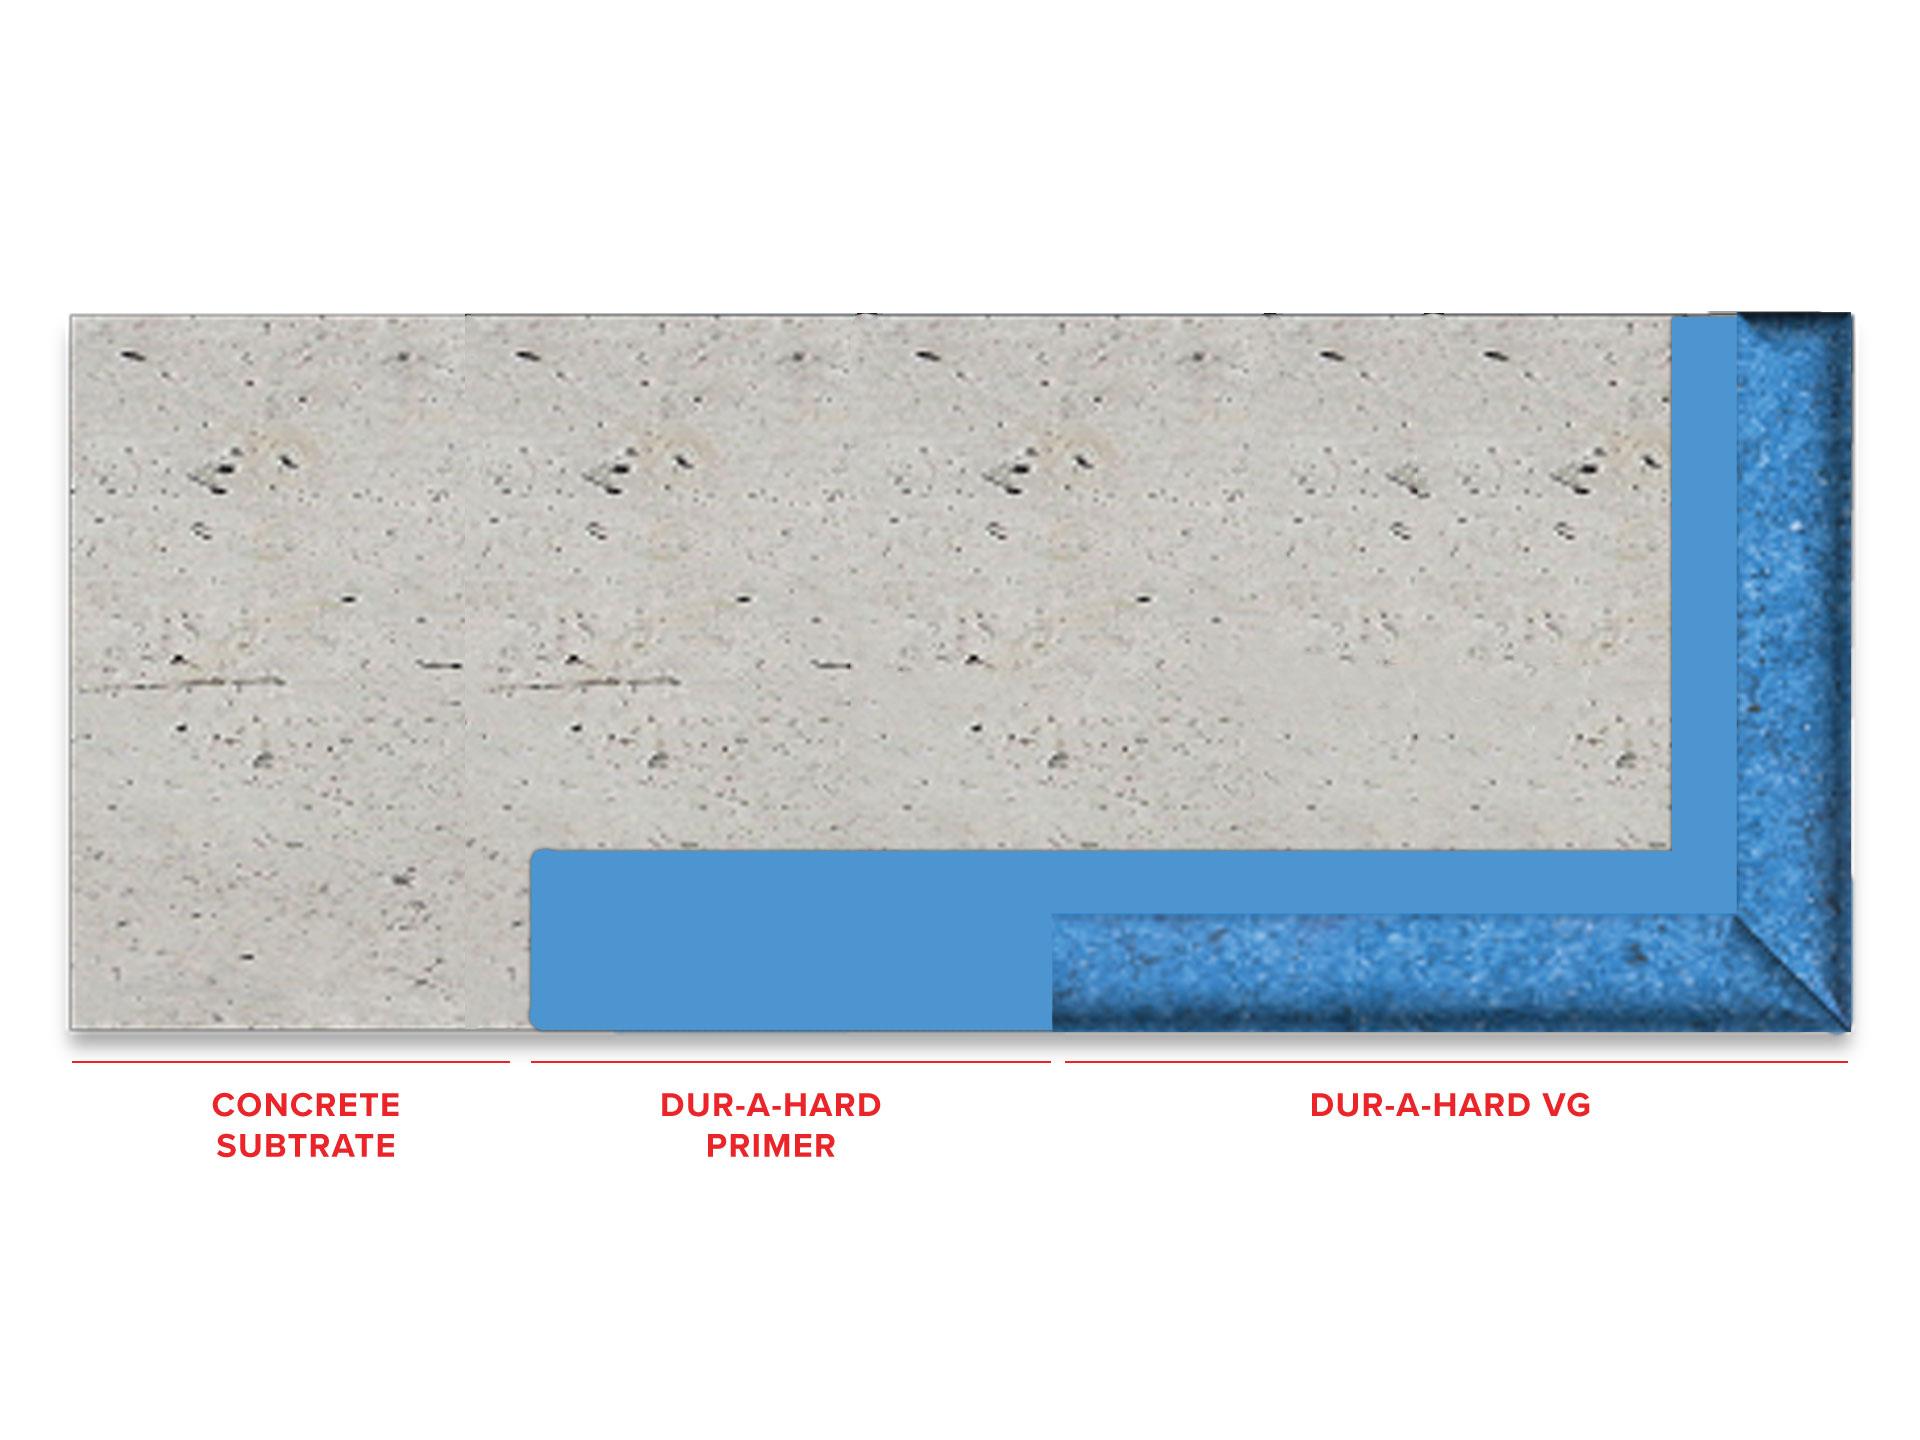 dur-a-hard-vg-vertical-grade-cementitious-urethane-cove-trench-coating-system1574282257.jpg